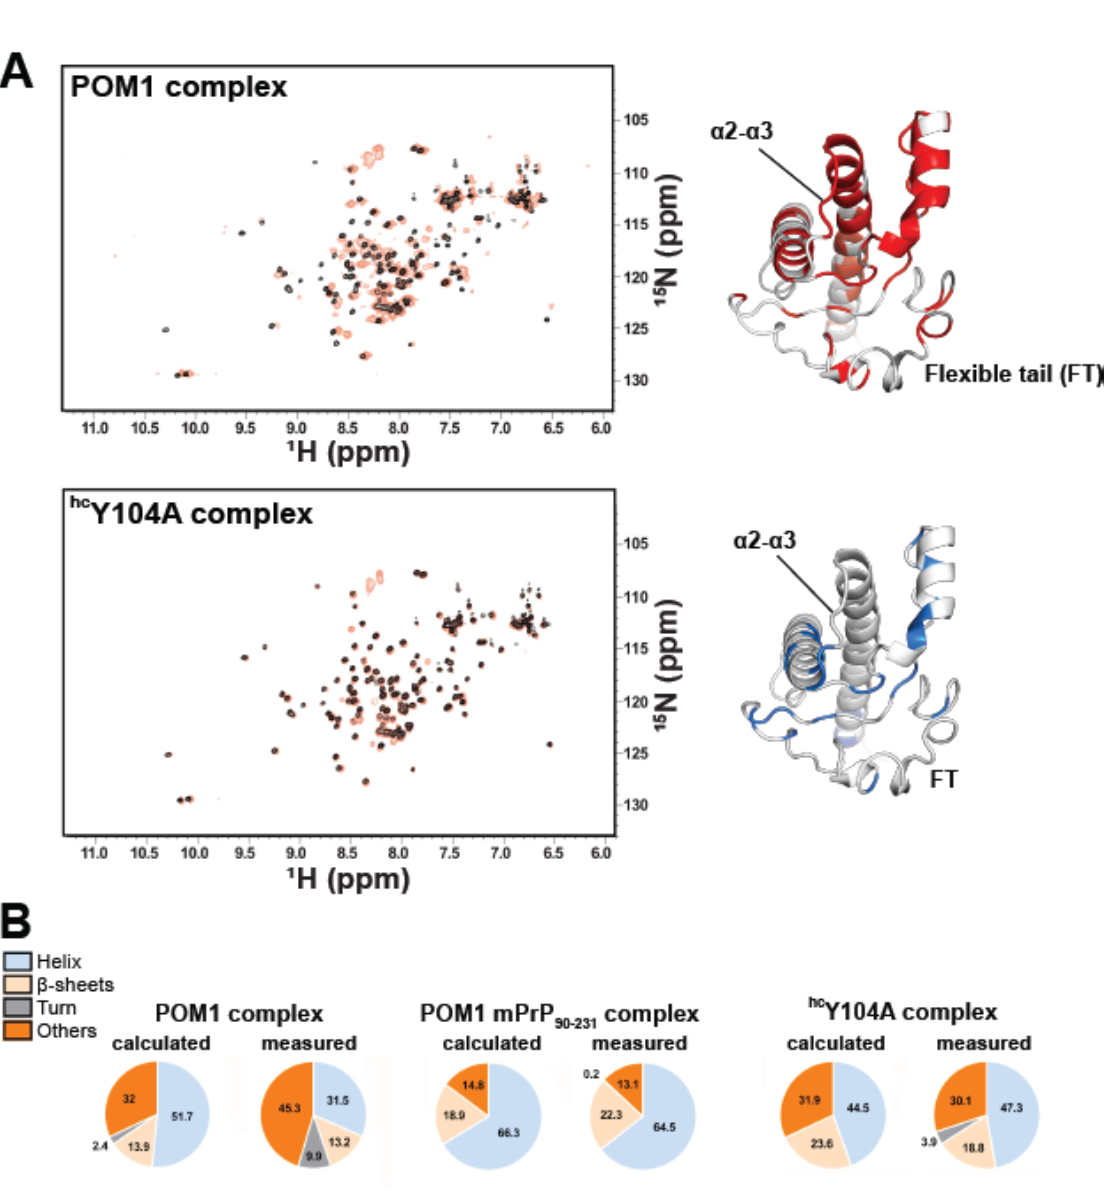 Antibody binding causes allosteric conformational changes in the GD and FT.<br/>a, Comparison between the [15N,1H]-TROSY spectra of free rmPrP90–231 versus that bound to the hcY104A pomolog. Chemical-shift differences, reflecting subtle alterations of the local chemical structure, were visible not only in the epitope but also at distant sites in the GD and FT. Residues affected by antibody binding are in color on PrPC (GD and part of the FT are shown on a MD model of PrP). Differences between toxic and protective antibodies are evident in the α2–α3 loop (the Y104A complex is identical to free PrPC) and in the FT region closer to the GD. b, Content of secondary structure estimated from CD spectra of the rmPrP–pomologs complexes. ‘Calculated’ indicates the secondary structure content if the rmPrP and pomolog did not change upon binding. POM1 displayed increased content of irregular structure (measured versus calculated) when in complex with full rmPrP23–231, but identical content when in complex with a construct lacking the FT (rmPrP90–231). This indicates that the FT changes conformation upon POM1 binding. Conversely, no differences were detected with the protective pomolog hcY104A.